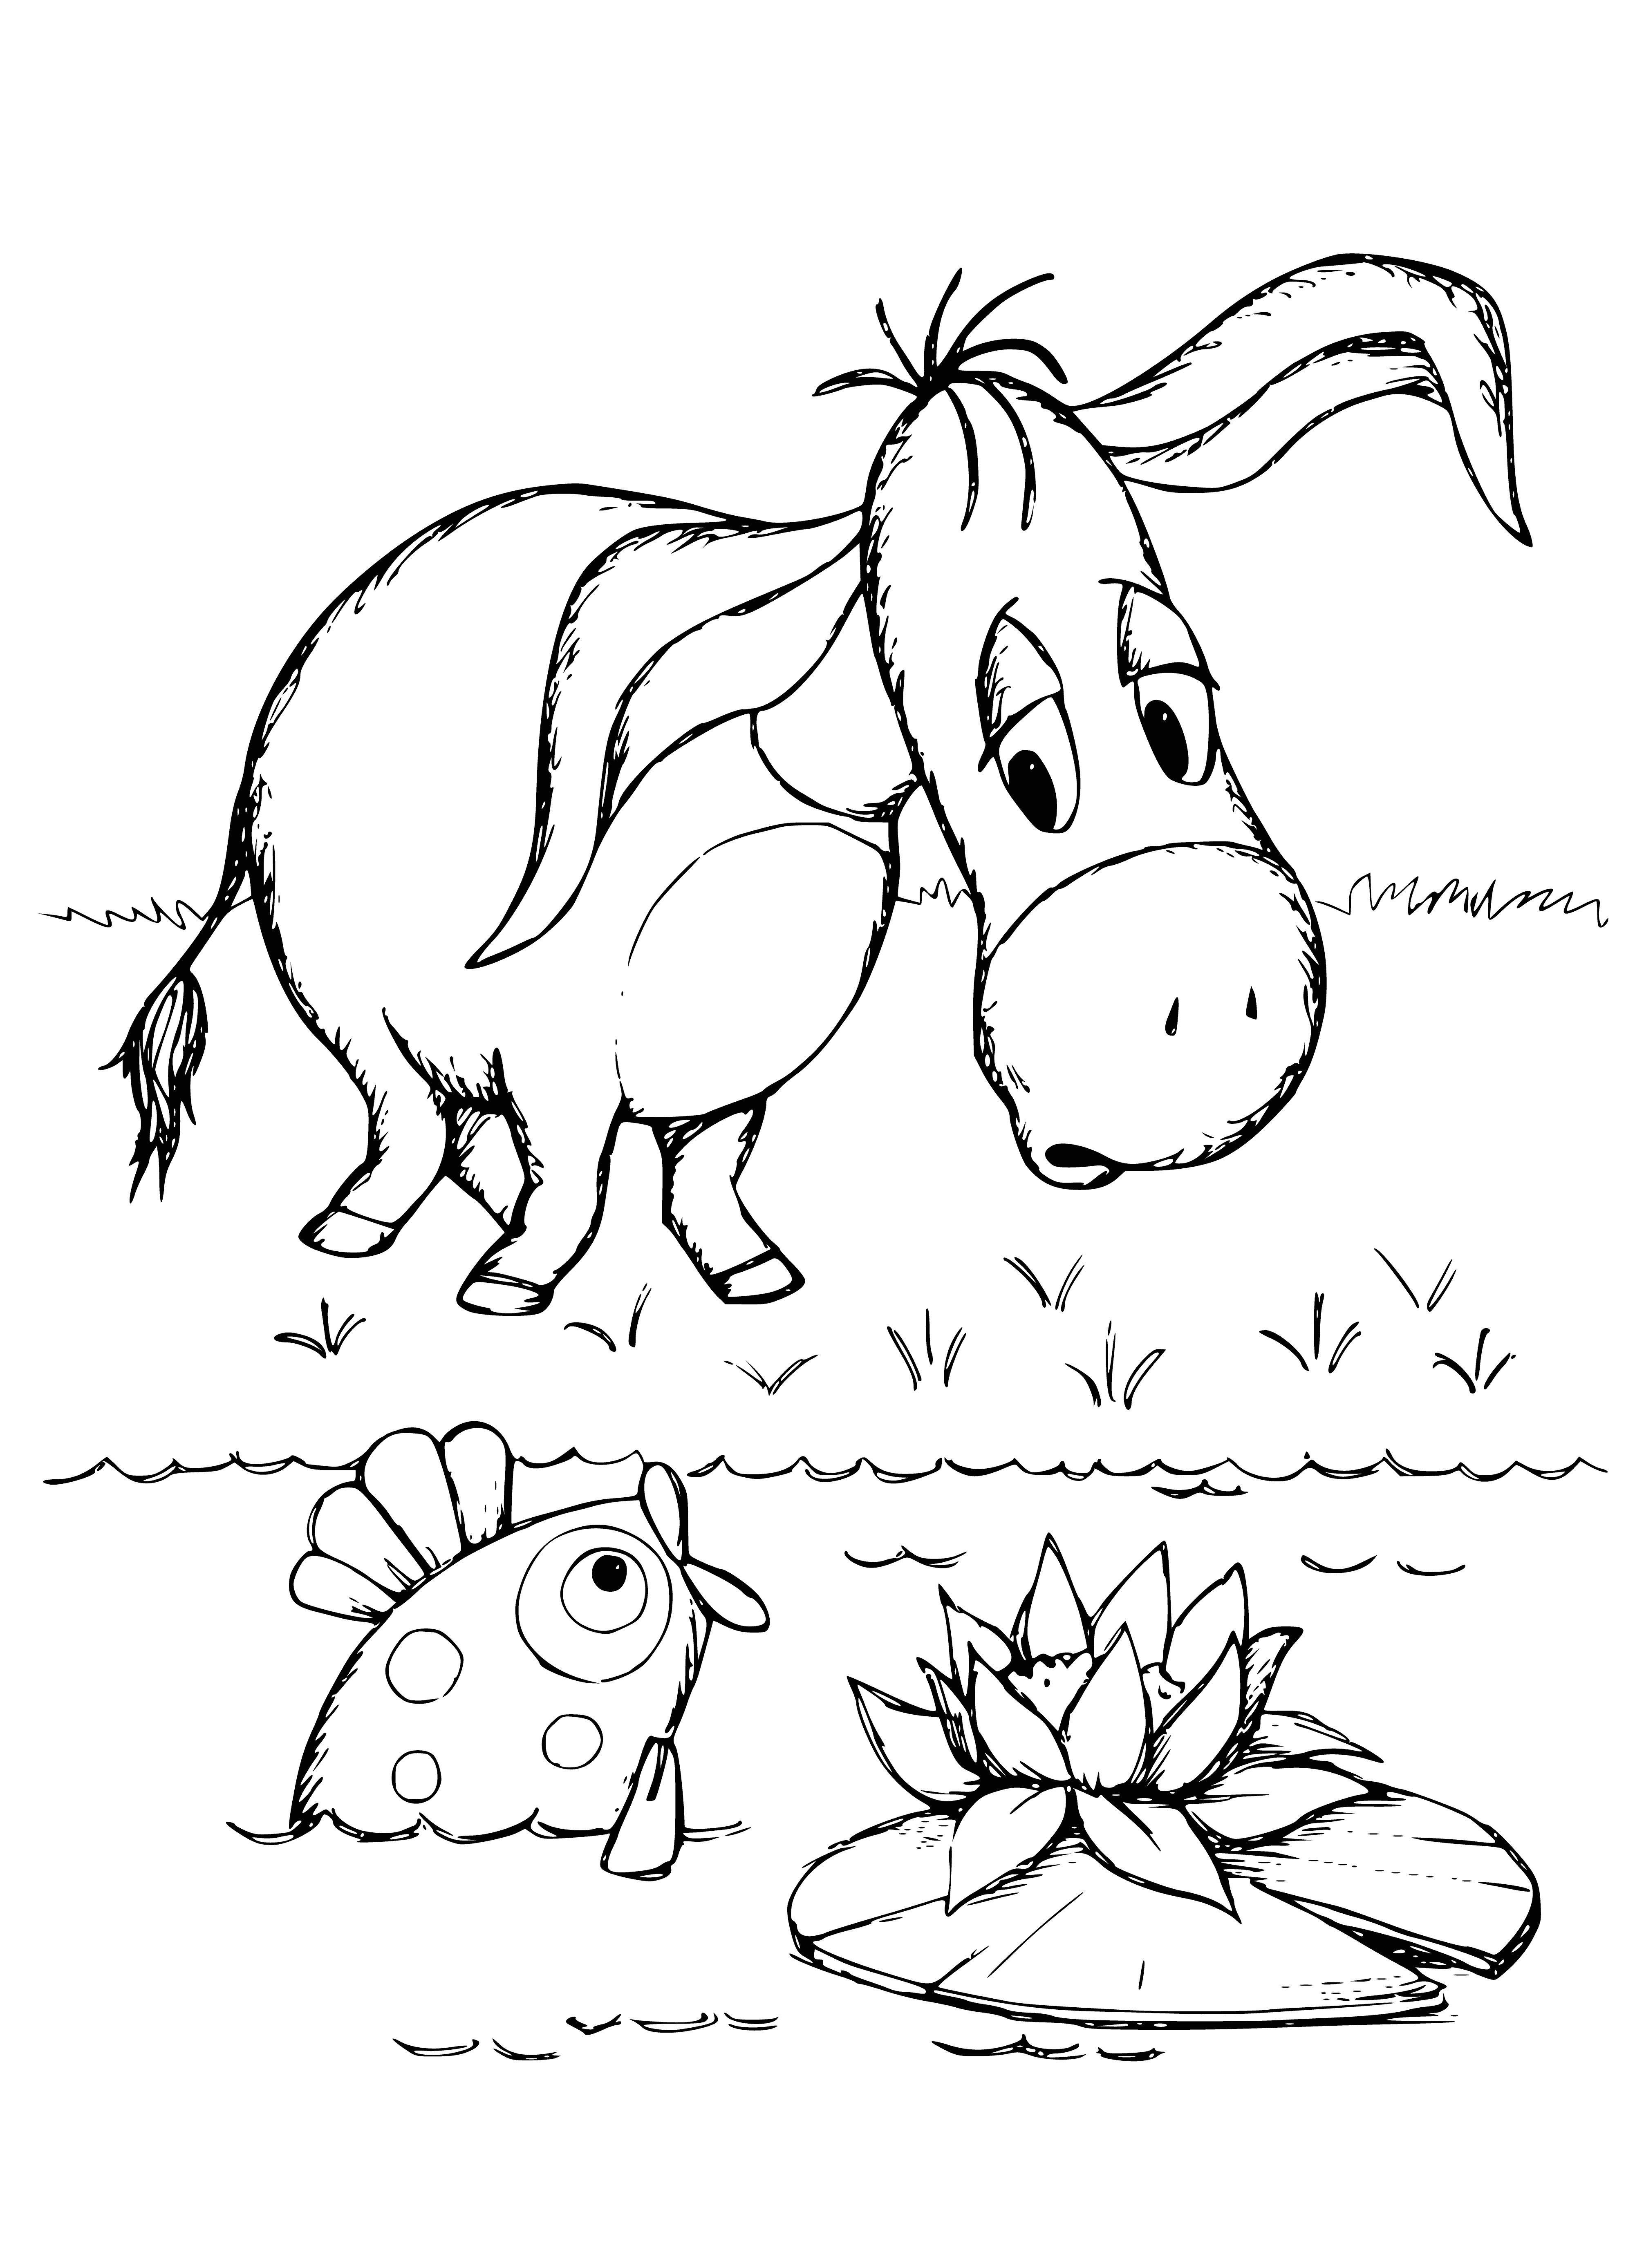 coloring page: Donkey stands on a hill, arms crossed, head tilted, looking into the distance.